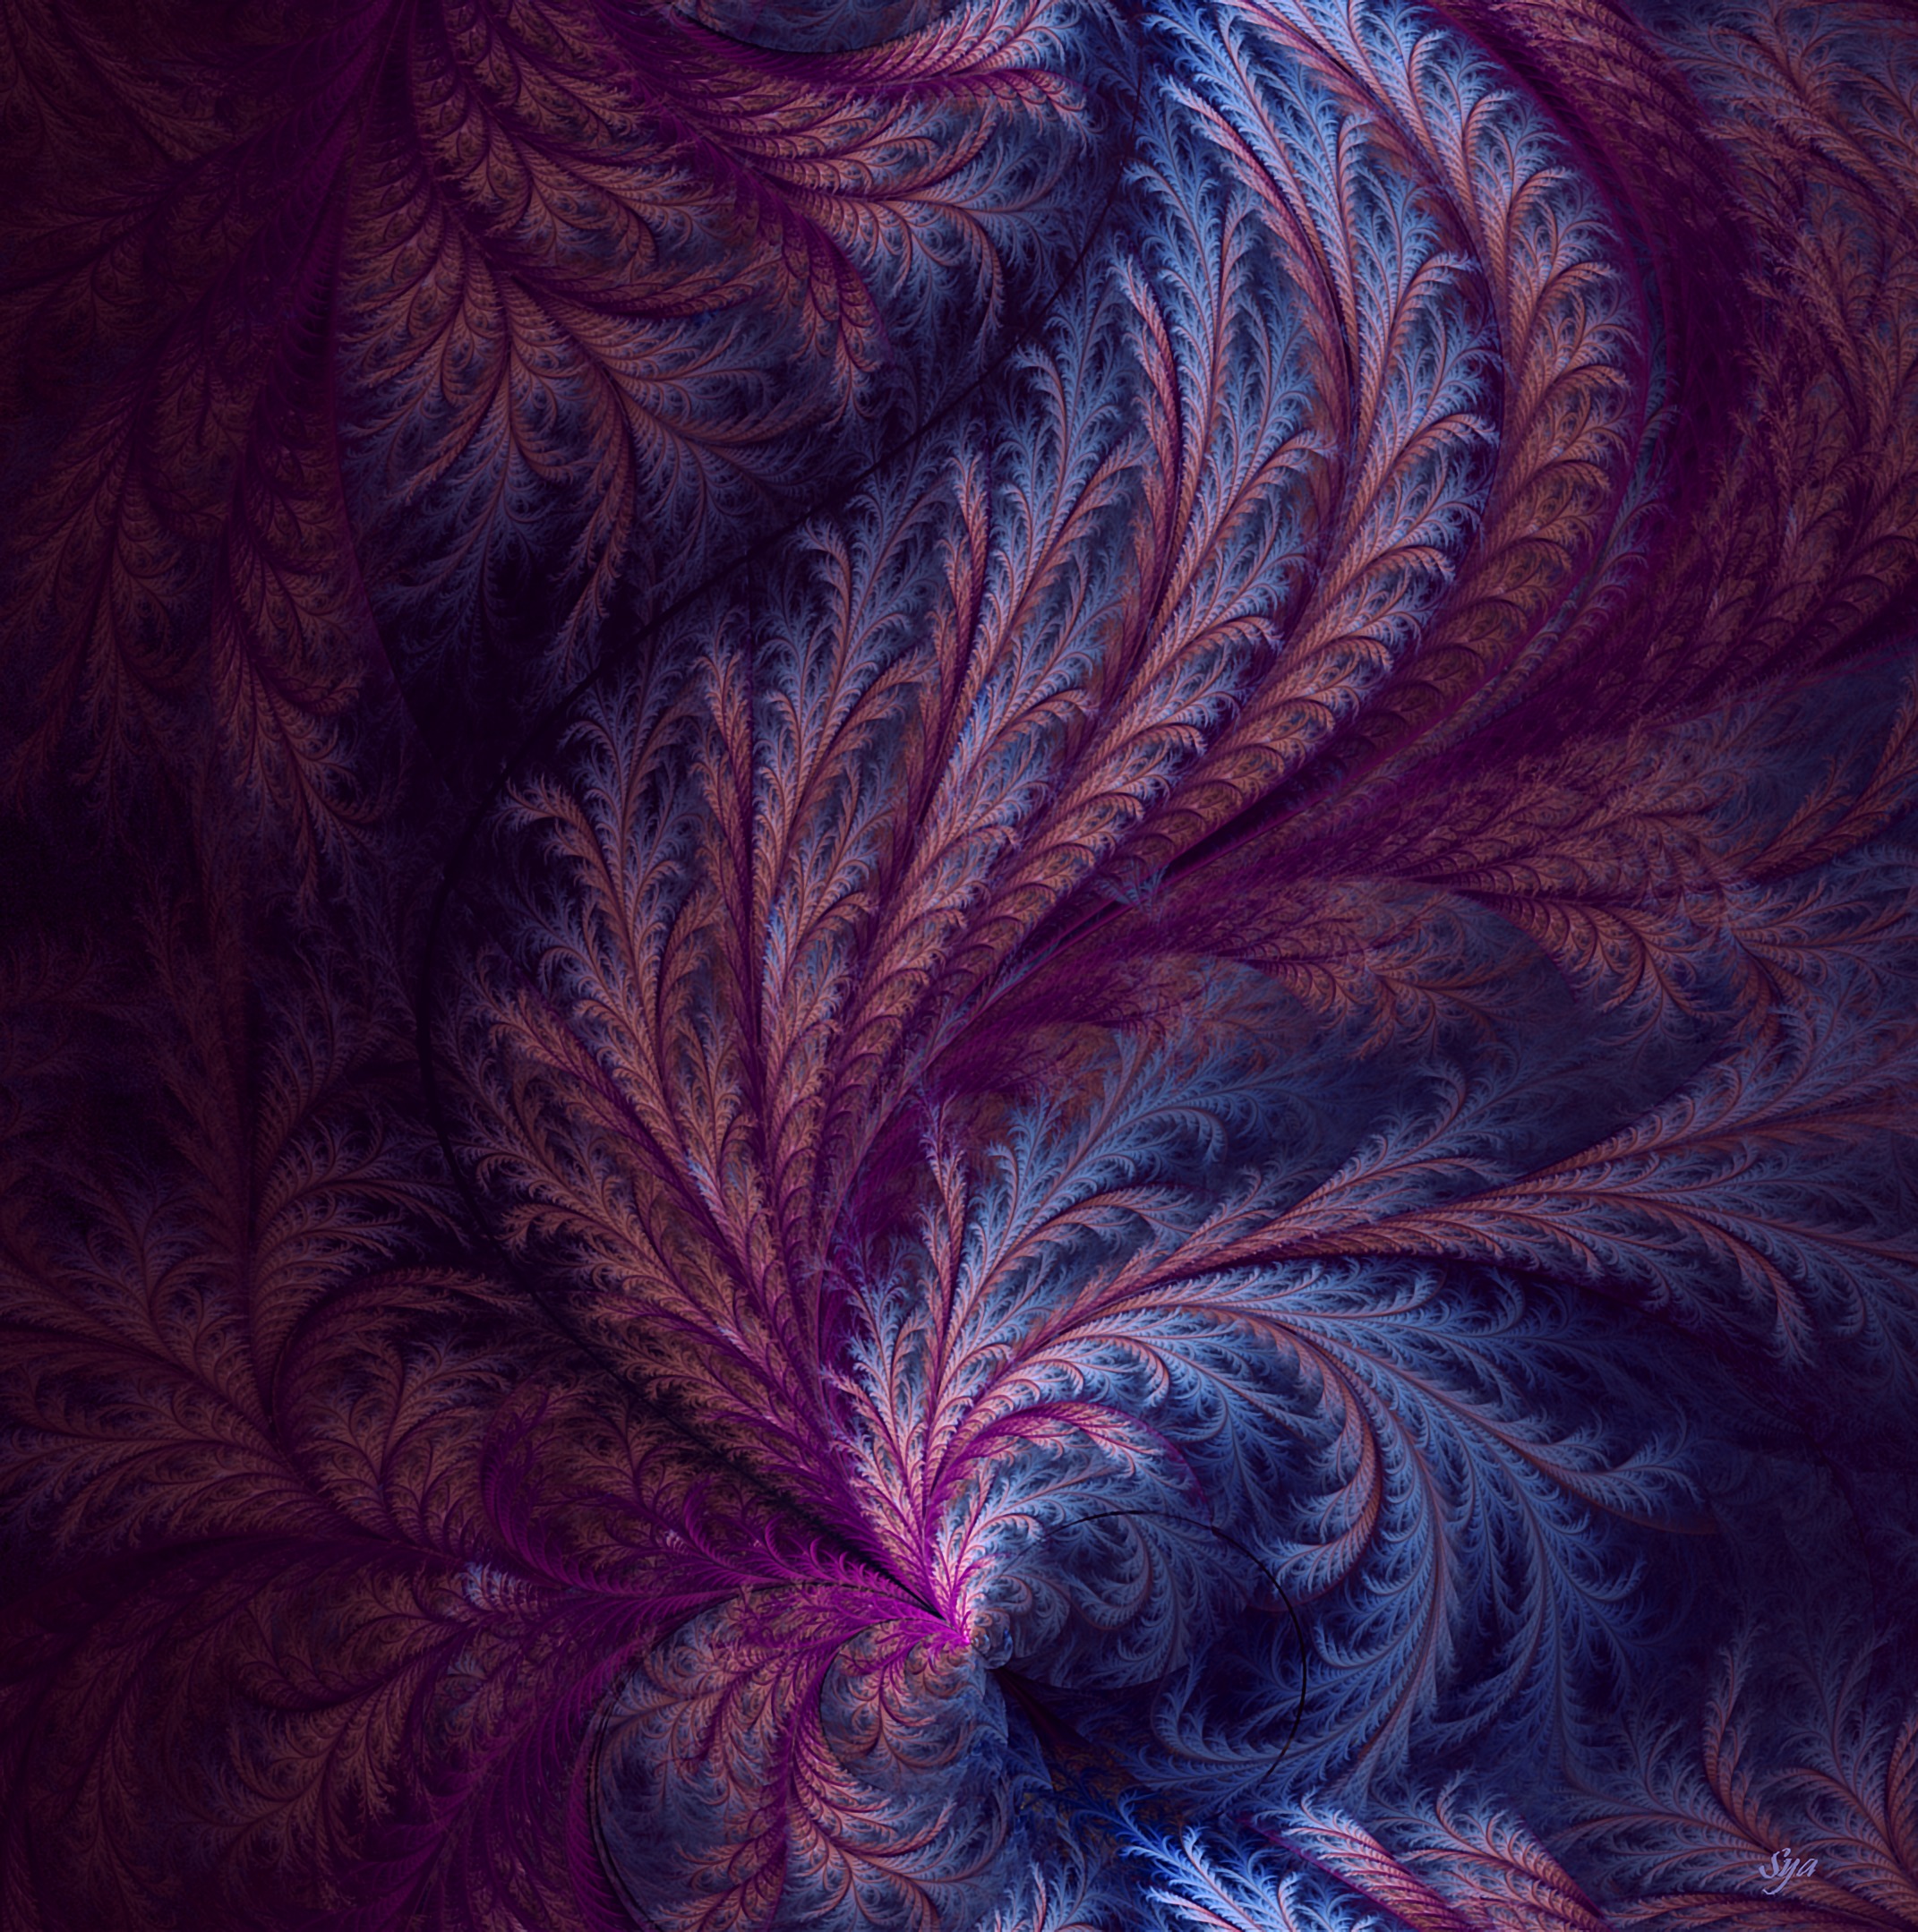 fractal, confused, pattern, branchy, abstract, intricate, branched 2160p